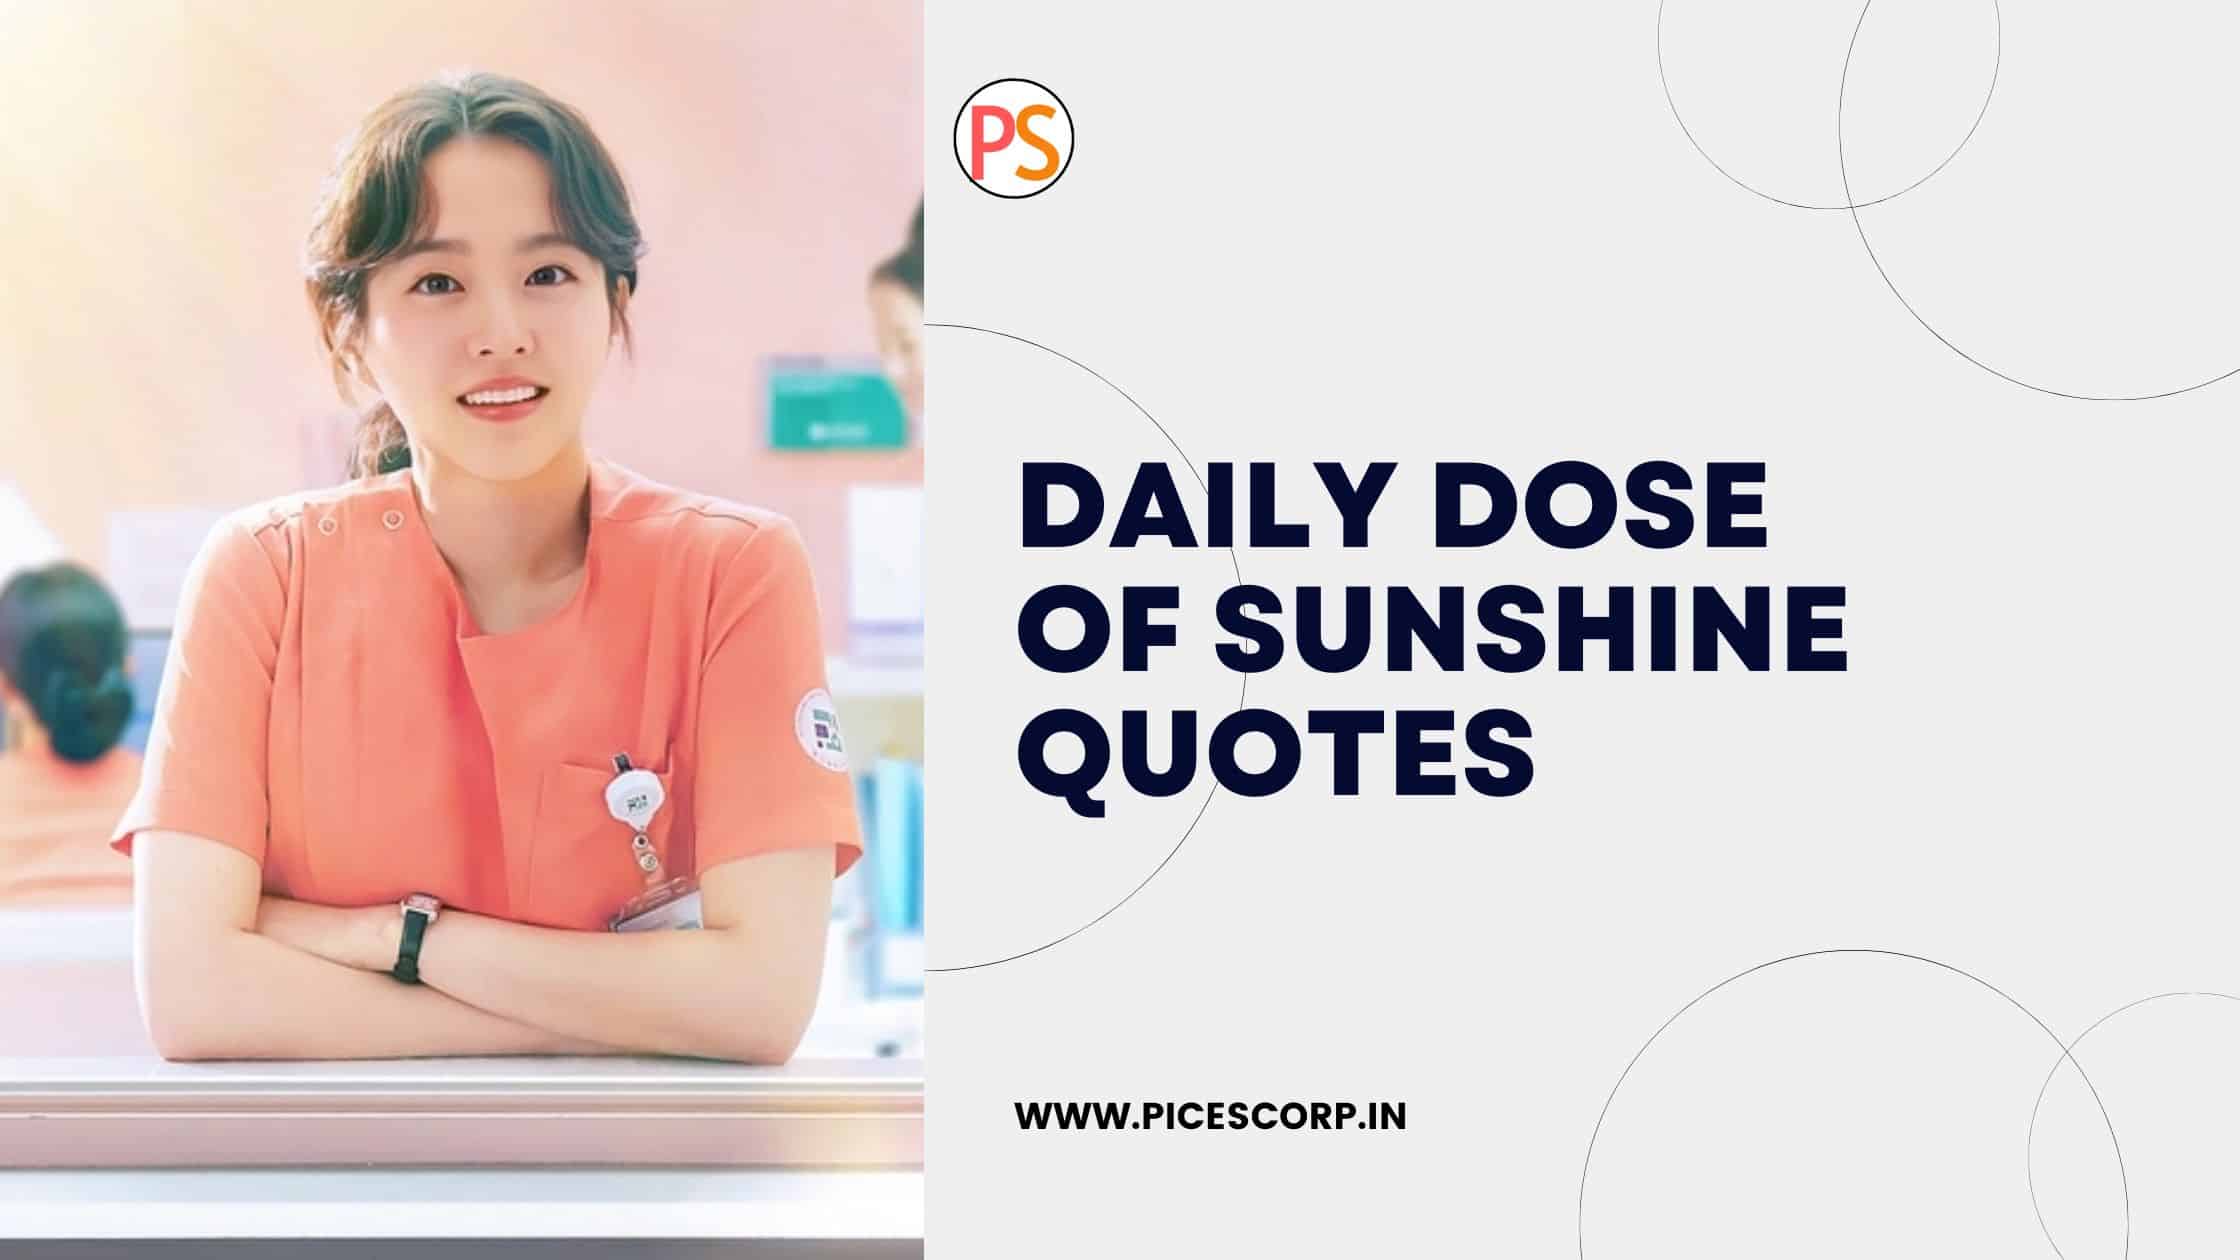 Daily Dose Of Sunshine Quotes Picescorp